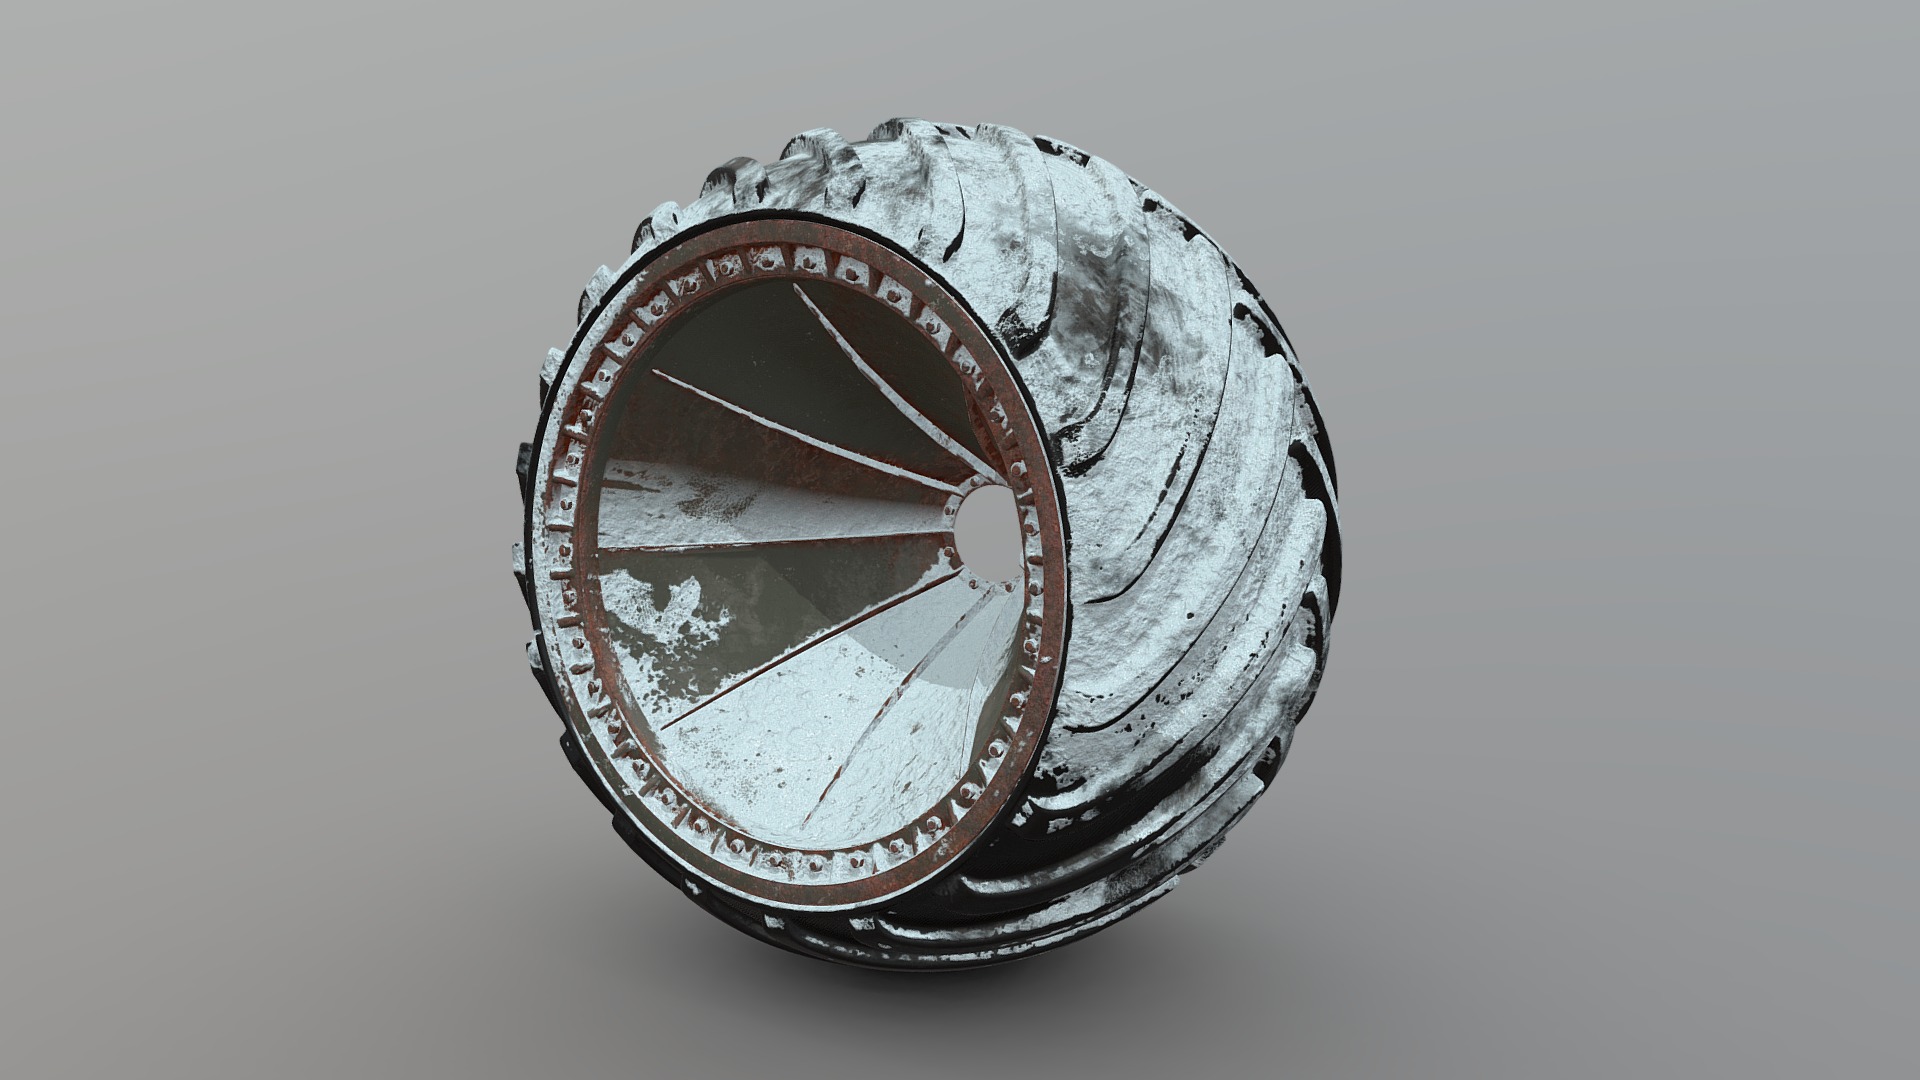 3D model ZIL-Wheel Arched-Old_Winte / ЗИЛ-Колесо Арочное - This is a 3D model of the ZIL-Wheel Arched-Old_Winte / ЗИЛ-Колесо Арочное. The 3D model is about a coin with a design on it.